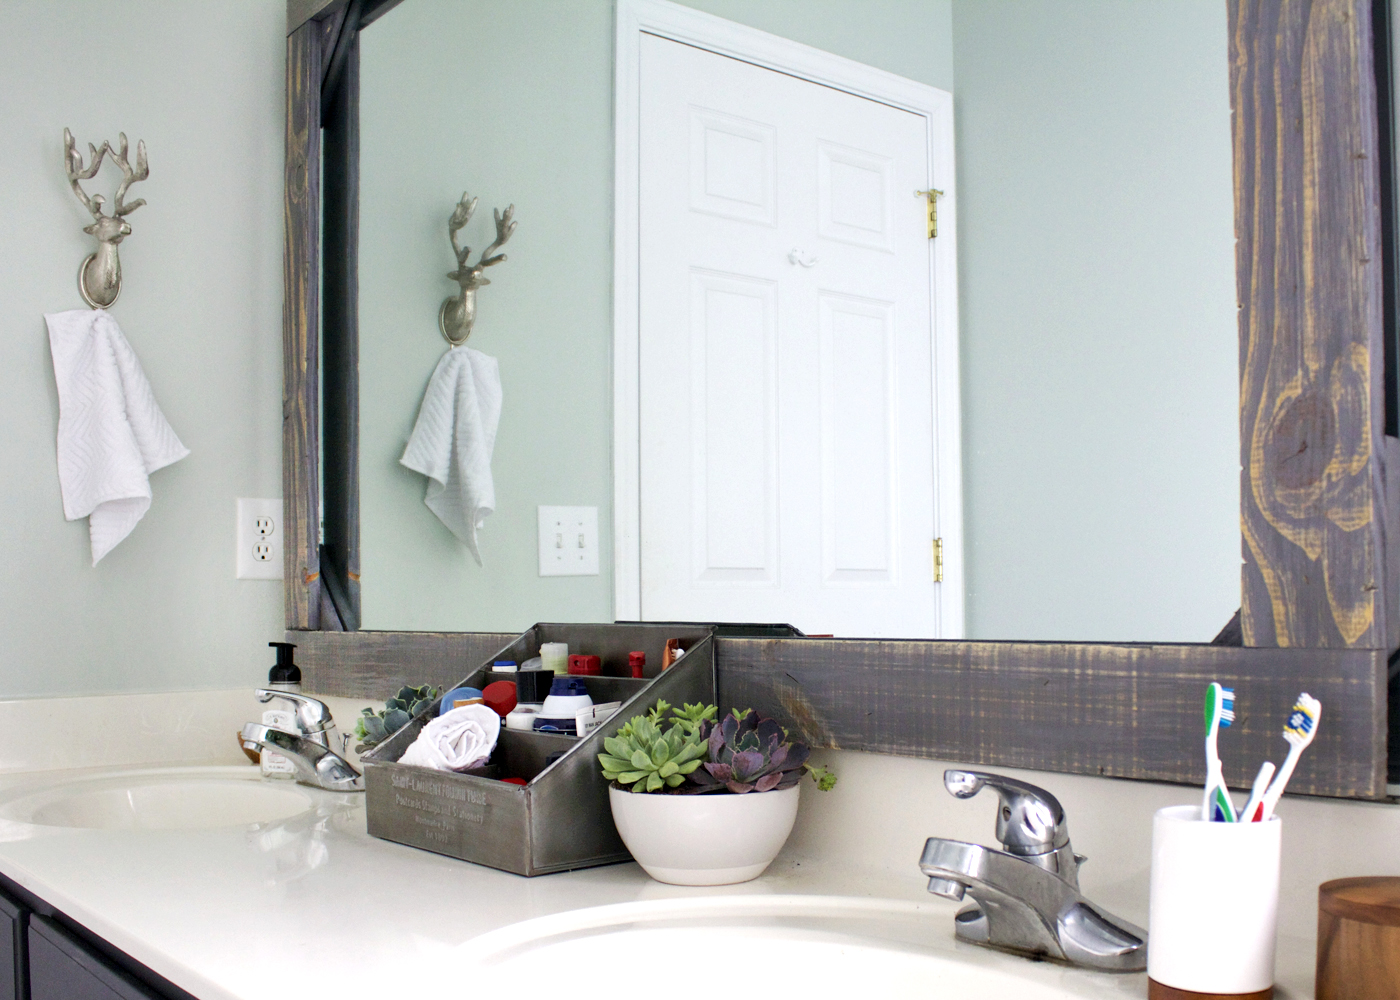 How To Frame A Mirror With Wood Tag, Rustic Vanity Mirror Ideas